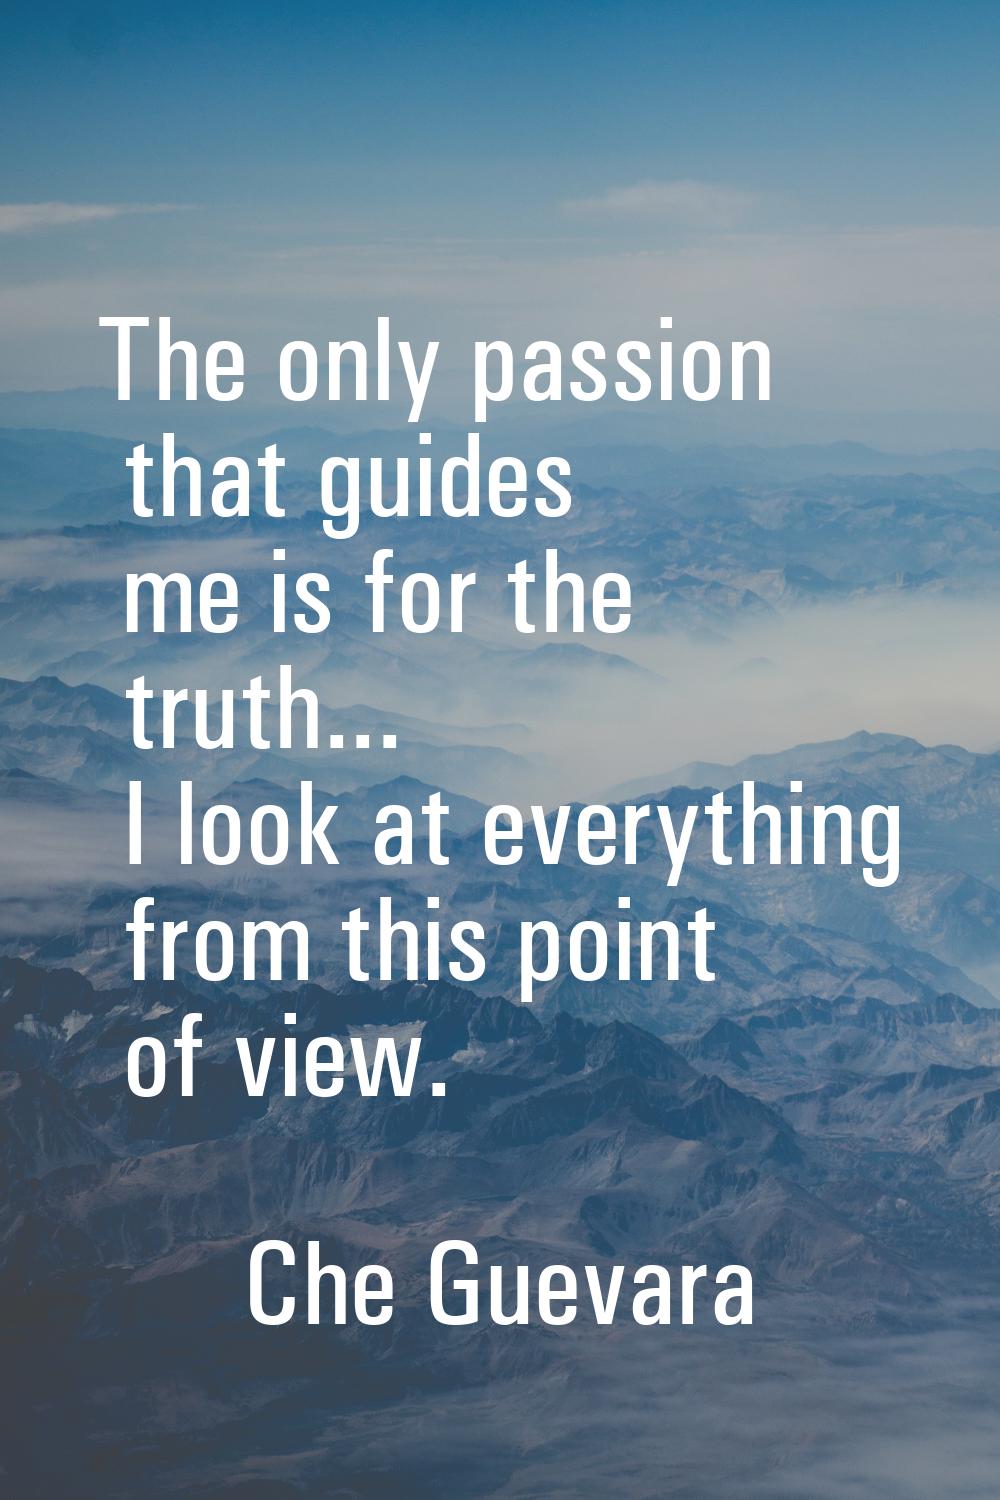 The only passion that guides me is for the truth... I look at everything from this point of view.